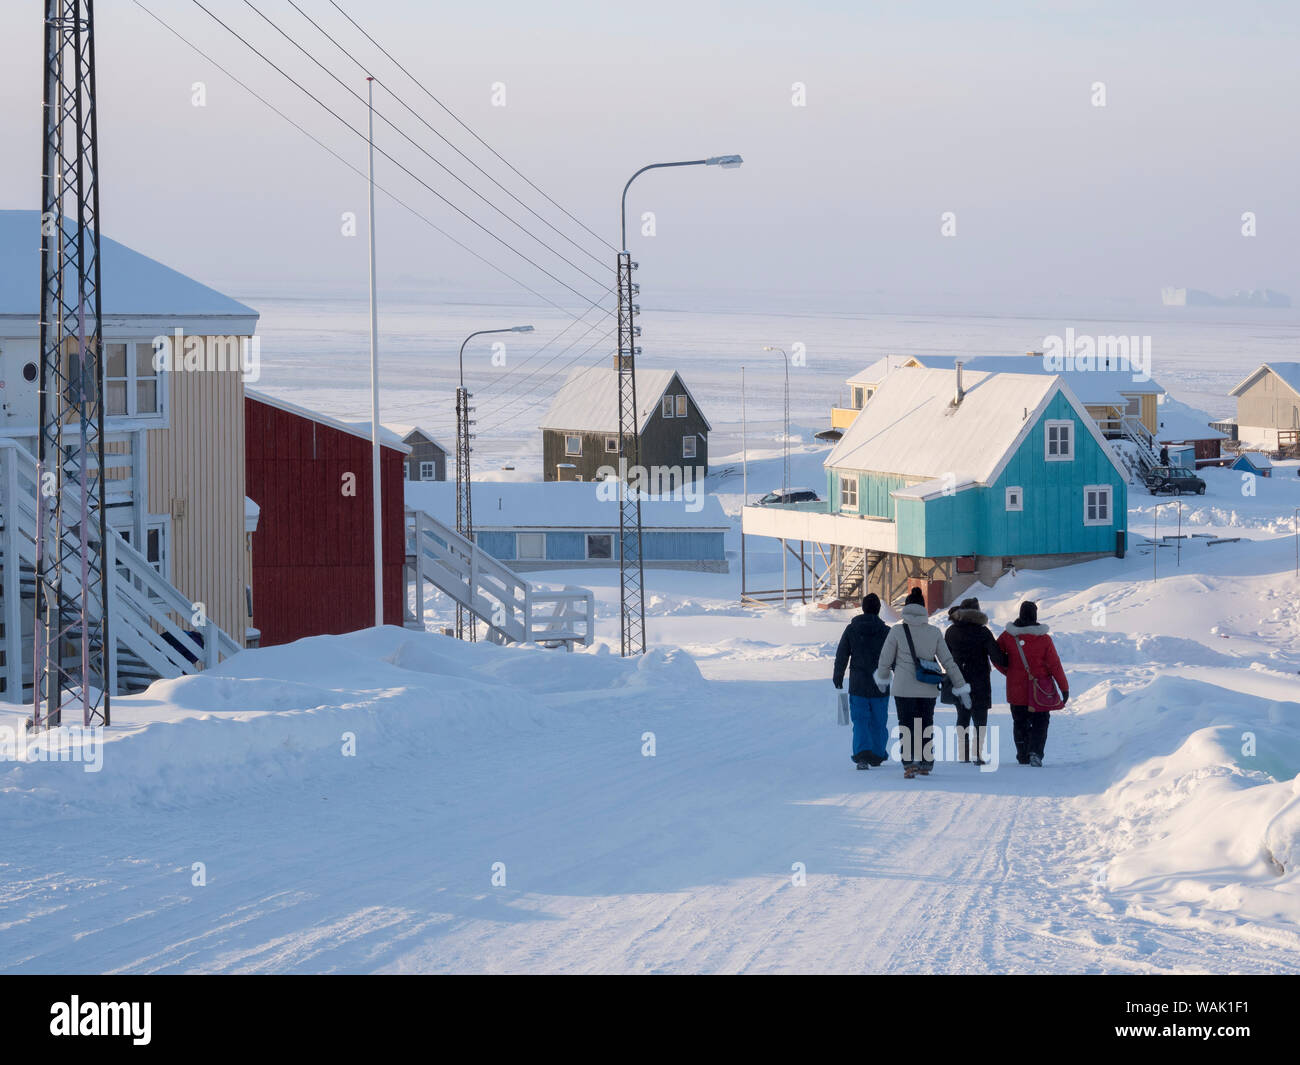 Streets of Ilulissat at the shore of Disko Bay. Greenland. (Editorial Use Only) Stock Photo